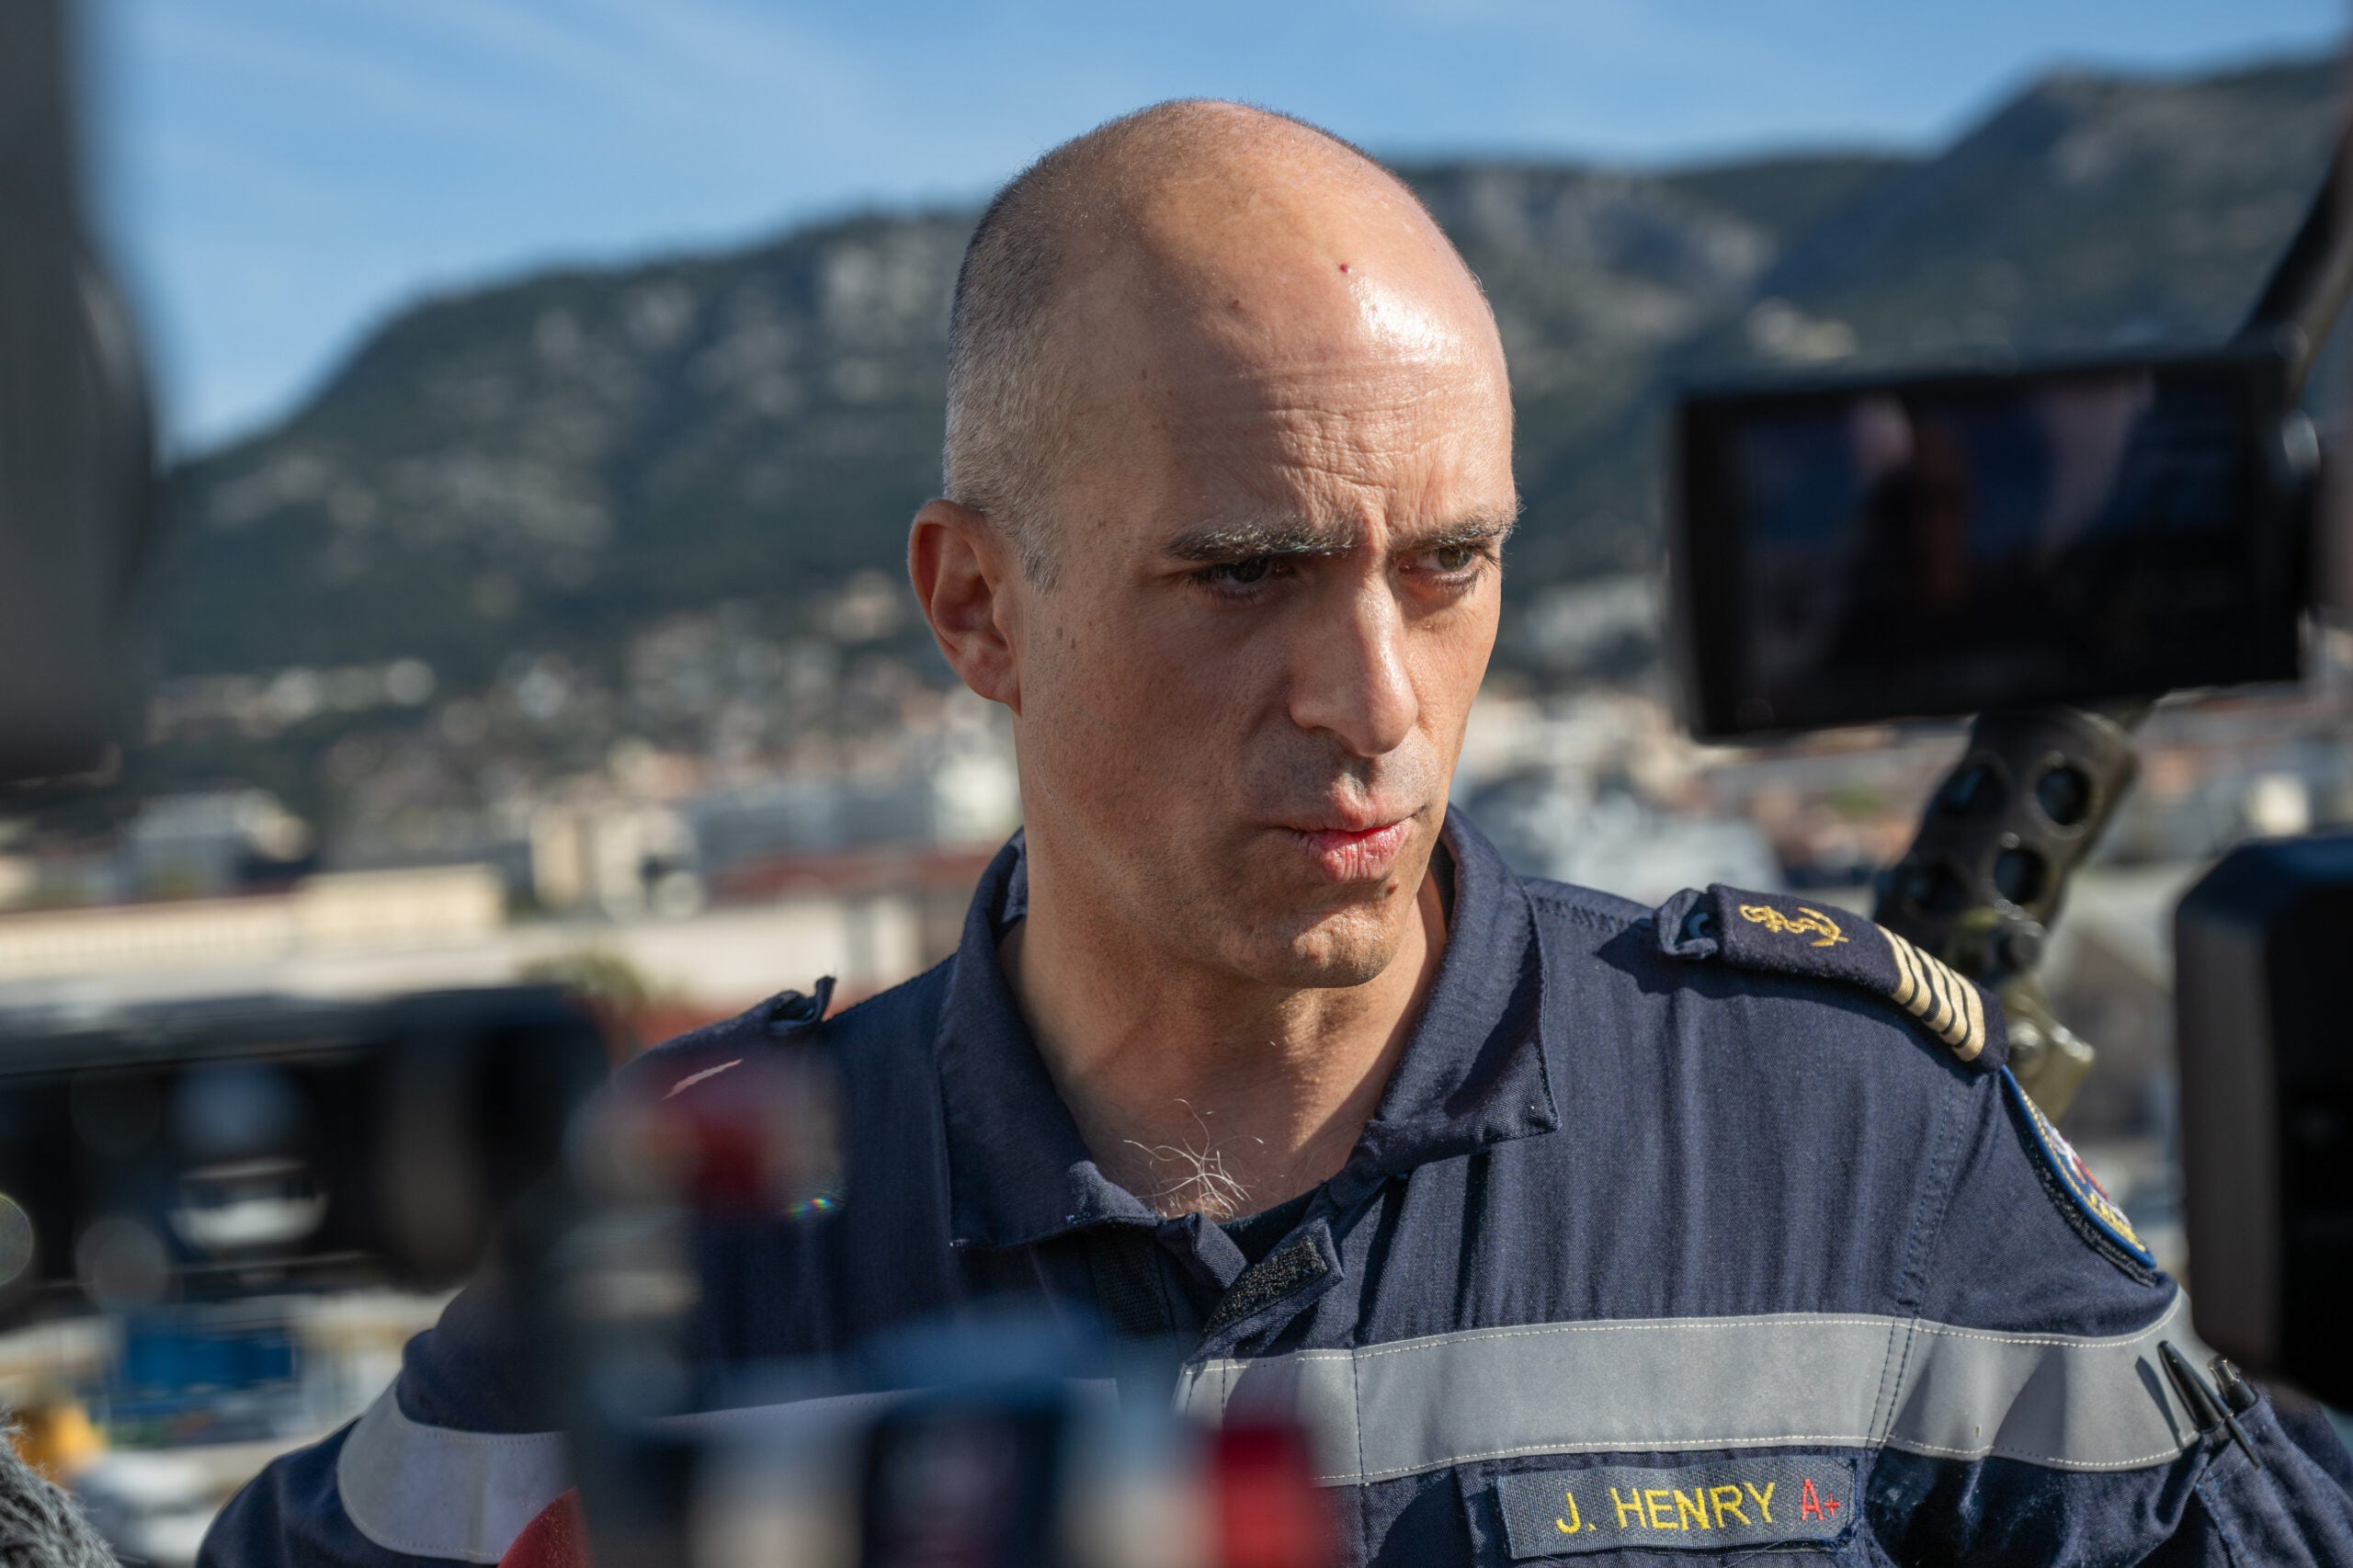 TOULON, FRANCE - 2024/04/04: Commander Jerome Henry of the FREMM-DA (frégate multi-missions à capacité de défense aerienne renforcée) Alsace. The French frigate Alsace returned to her home port of Toulon after a three-month mission in the Red Sea and Indian Ocean to defend merchant ships against attacks by Houti rebels. (Photo by Laurent Coust/SOPA Images/LightRocket via Getty Images)